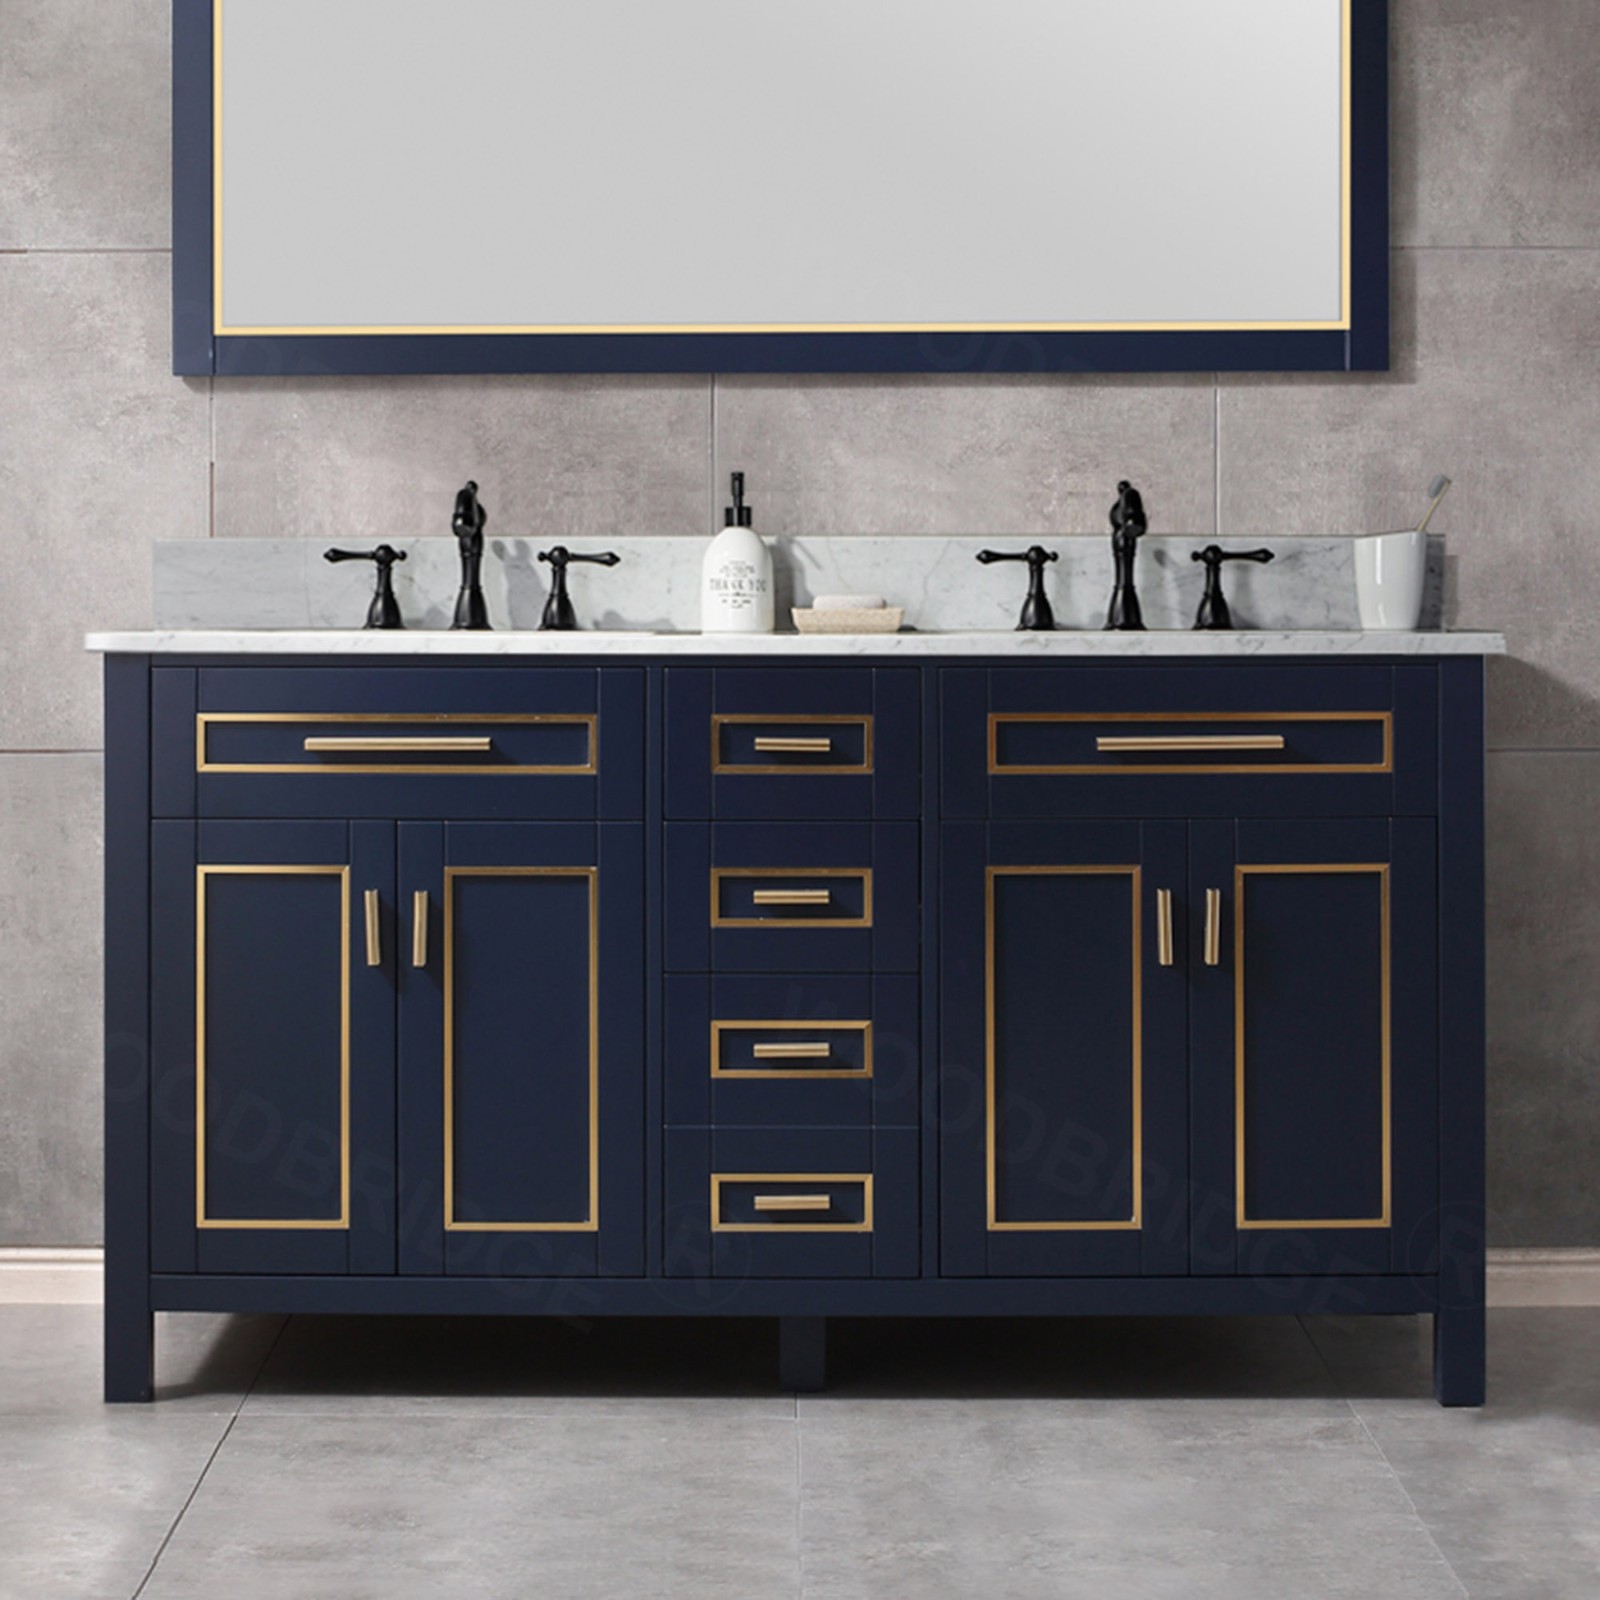  WOODBRIDGE Milan  61” Floor Mounted Single Basin Vanity Set with Solid Wood Cabinet in Navy Blue, and Carrara White Marble Vanity Top with Pre-installed Undermount Rectangle Bathroom Sink in White, Pre-Drilled 3-Hole for 4-inch Centerset Faucet_4654